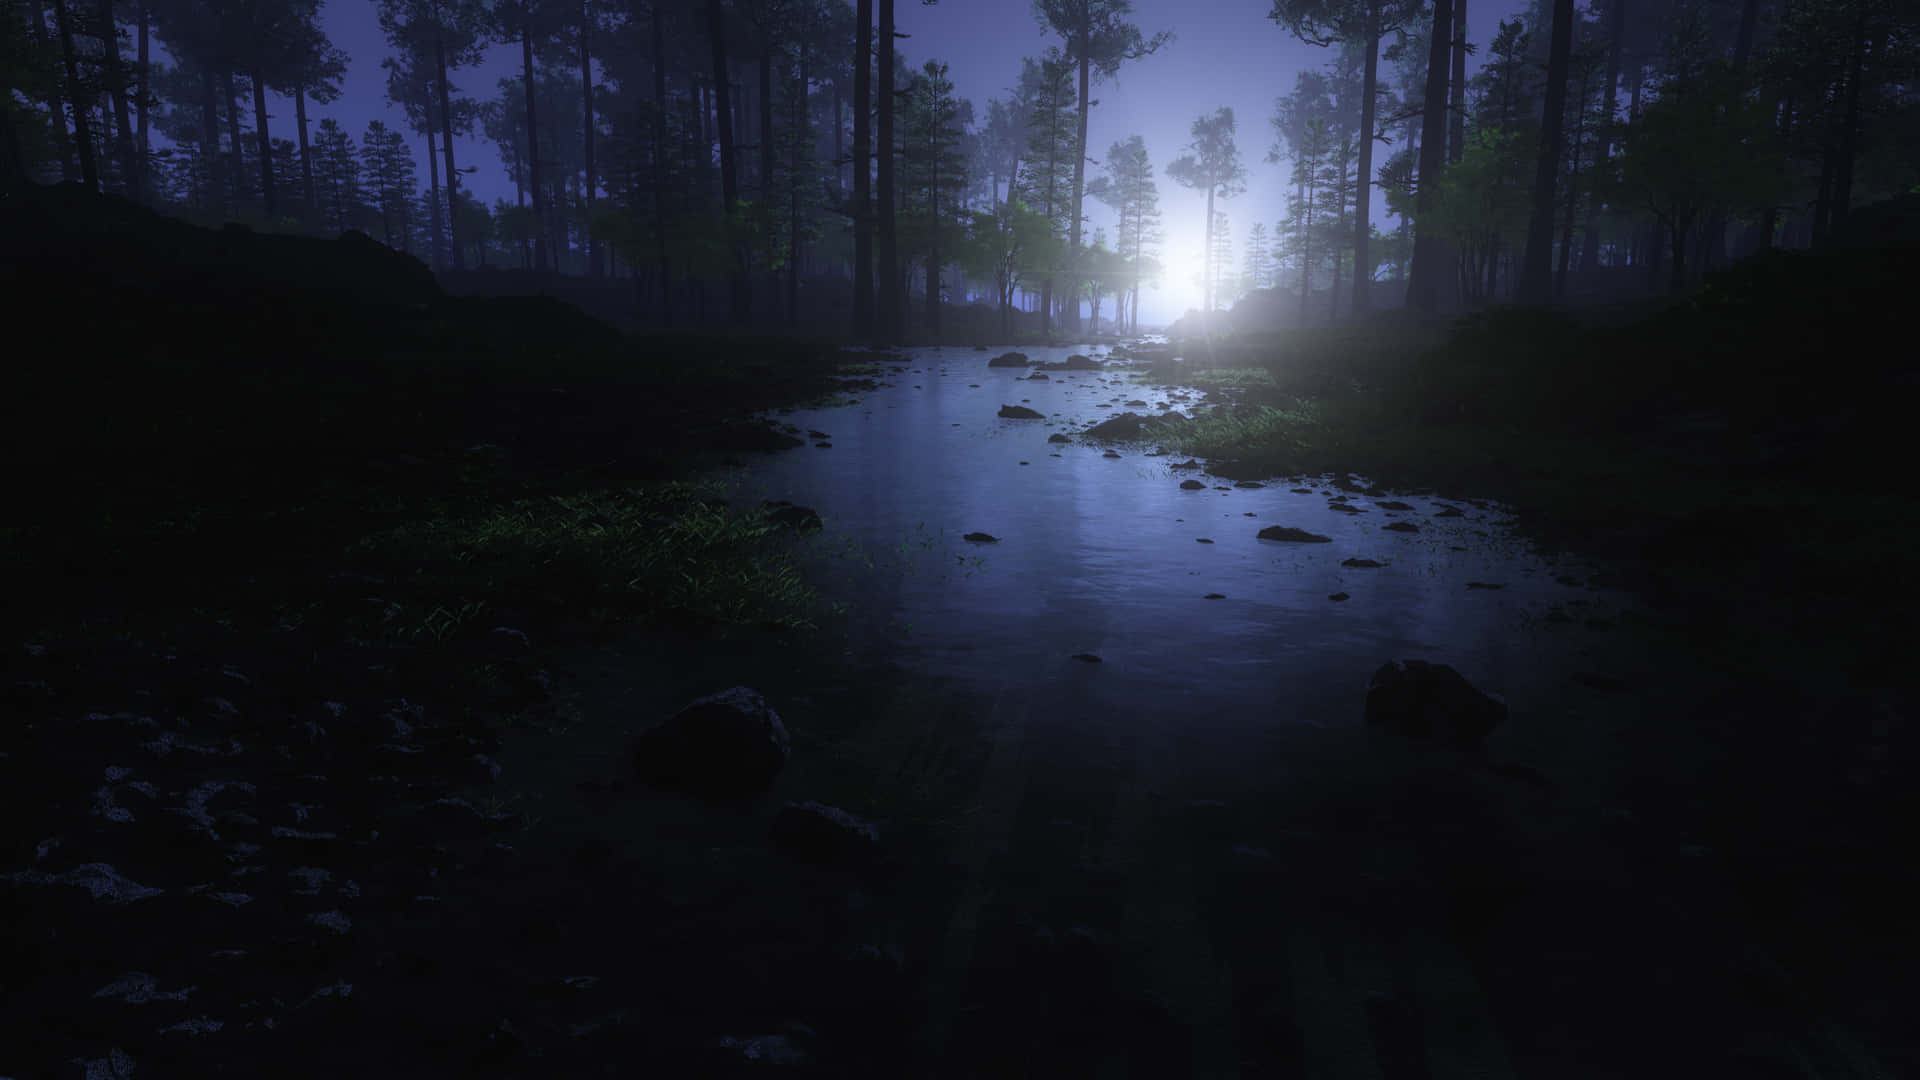 Explore the mysterious beauty of the Night Forest Wallpaper